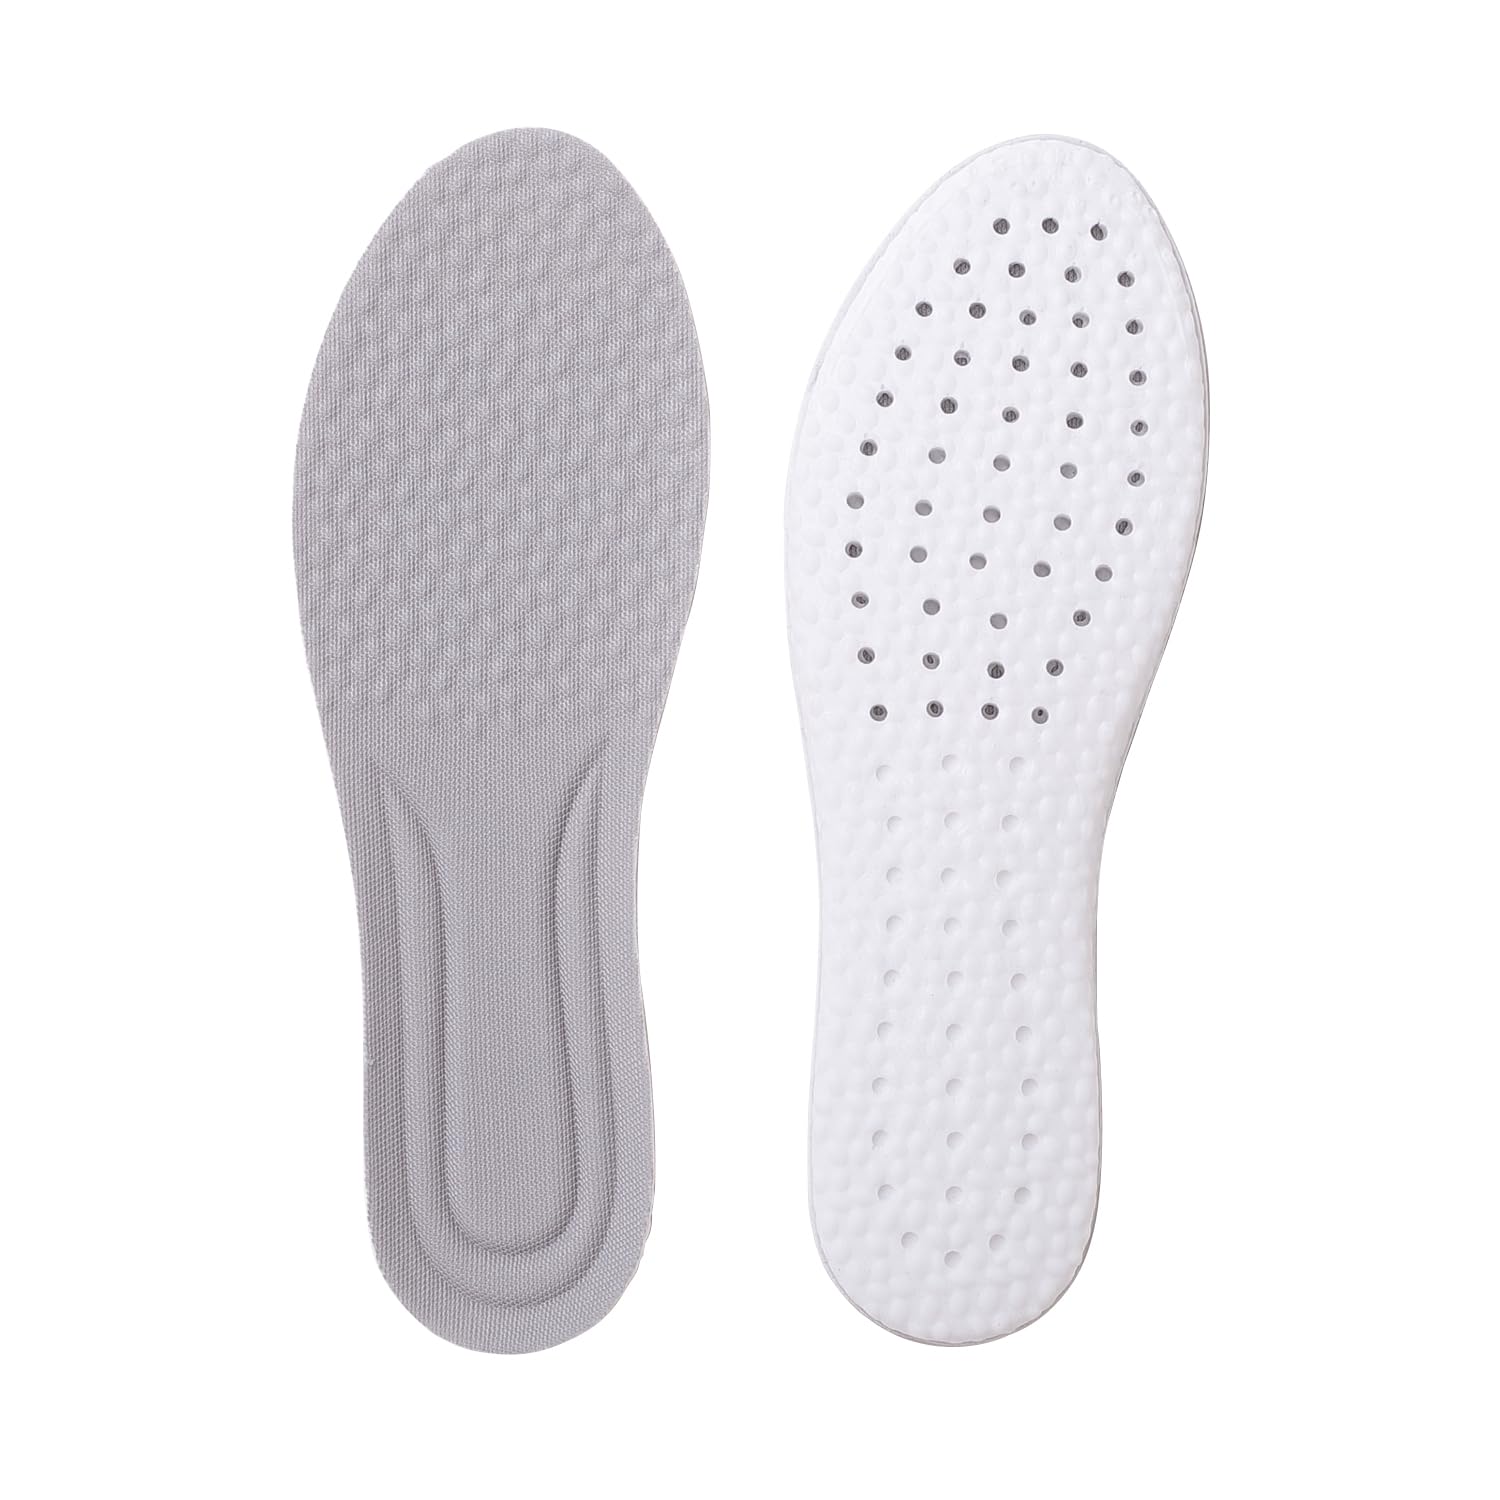 Dr Foot Air-Pillow® Insoles | Comfortable, Porous, and Breathable Insoles for Sports | Shock Absorption for Reduced Impact | Soothing Sensation | Relieves Foot Fatigue | - 1 Pair - (Medium Size)